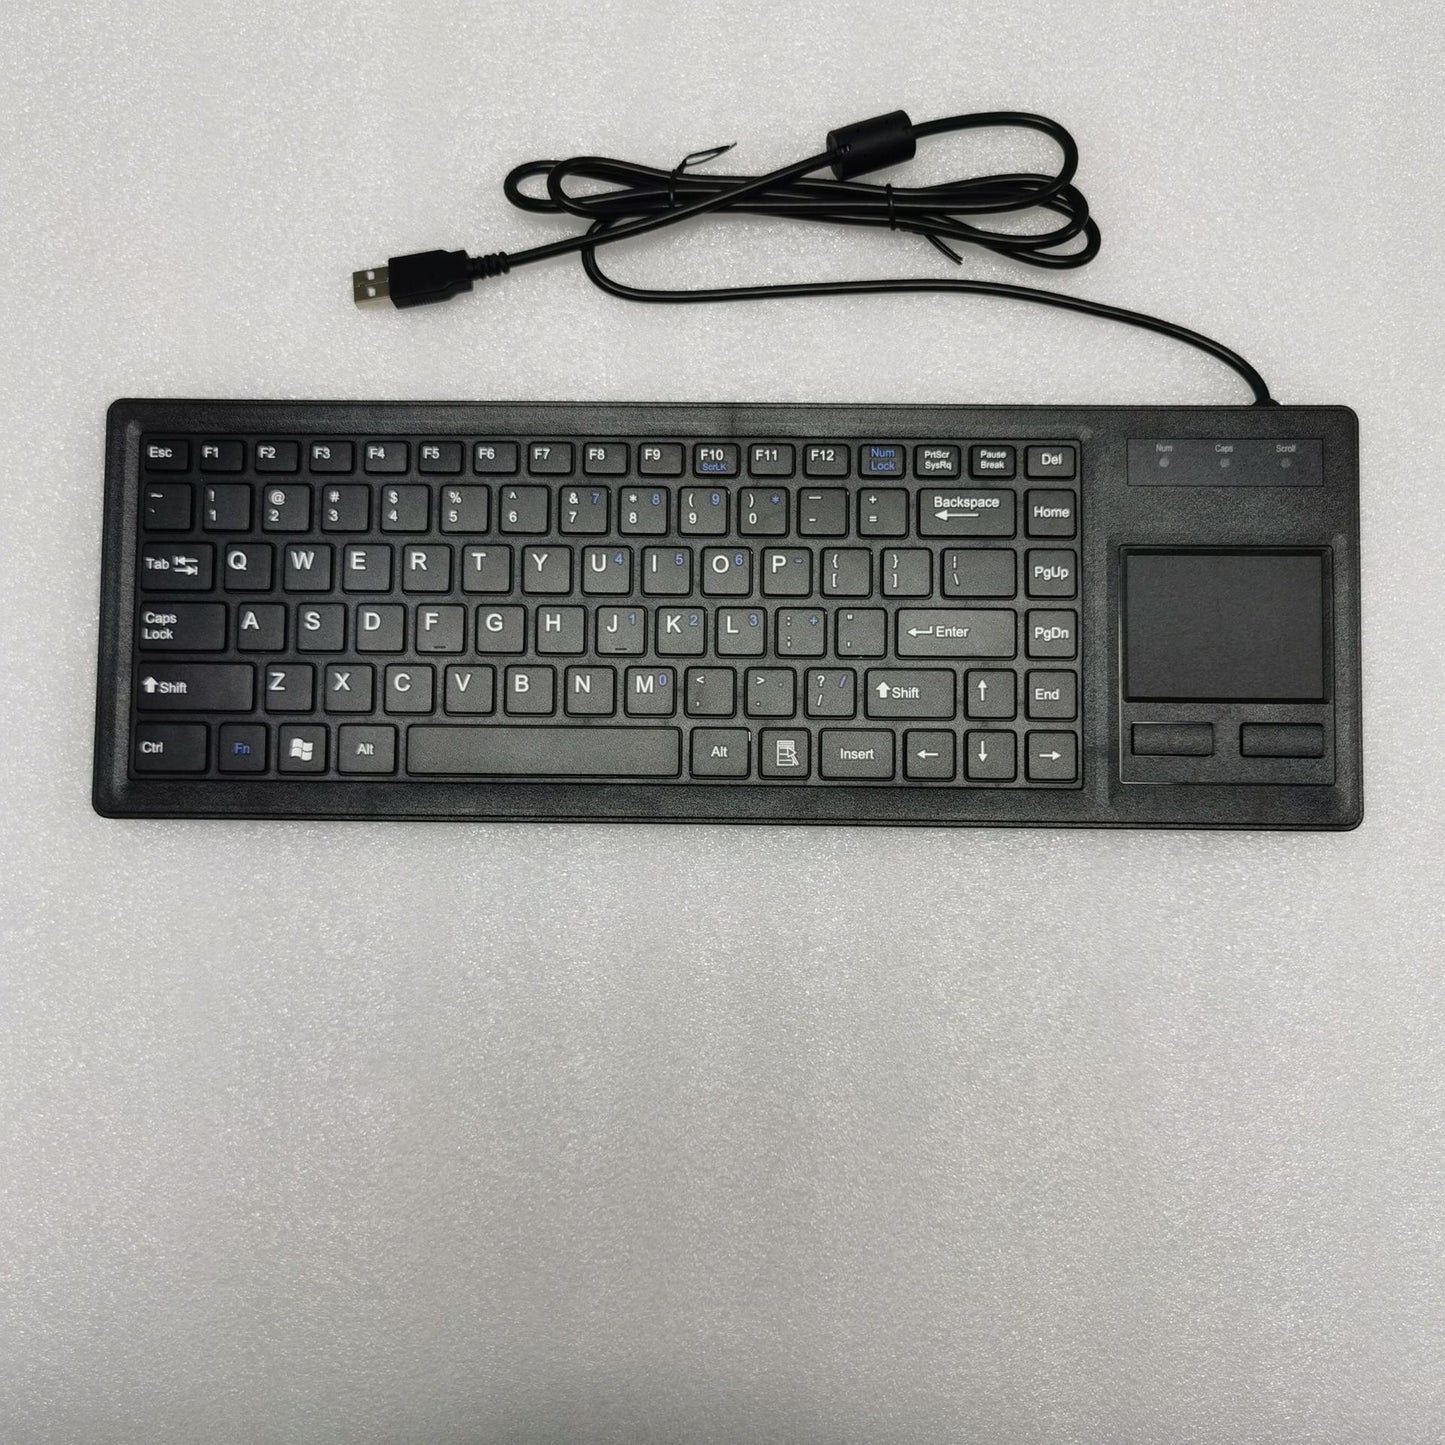 Industrial industrial control embedded plastic keyboard Query equipment, industrial computer, with touchpad